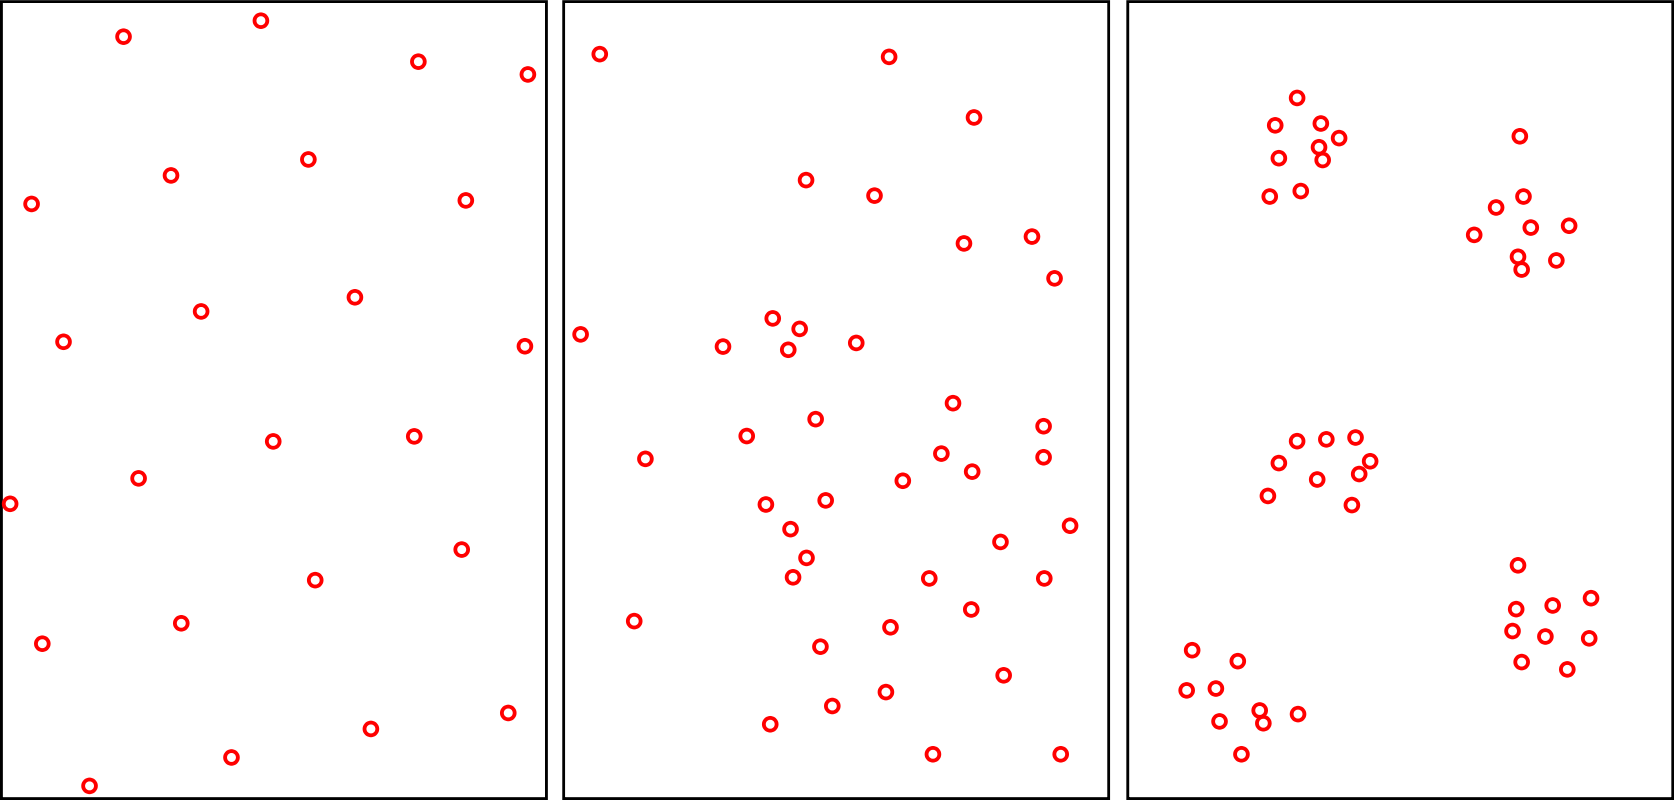 Three basic types of population distribution within a regional range: uniform, random, and clumped